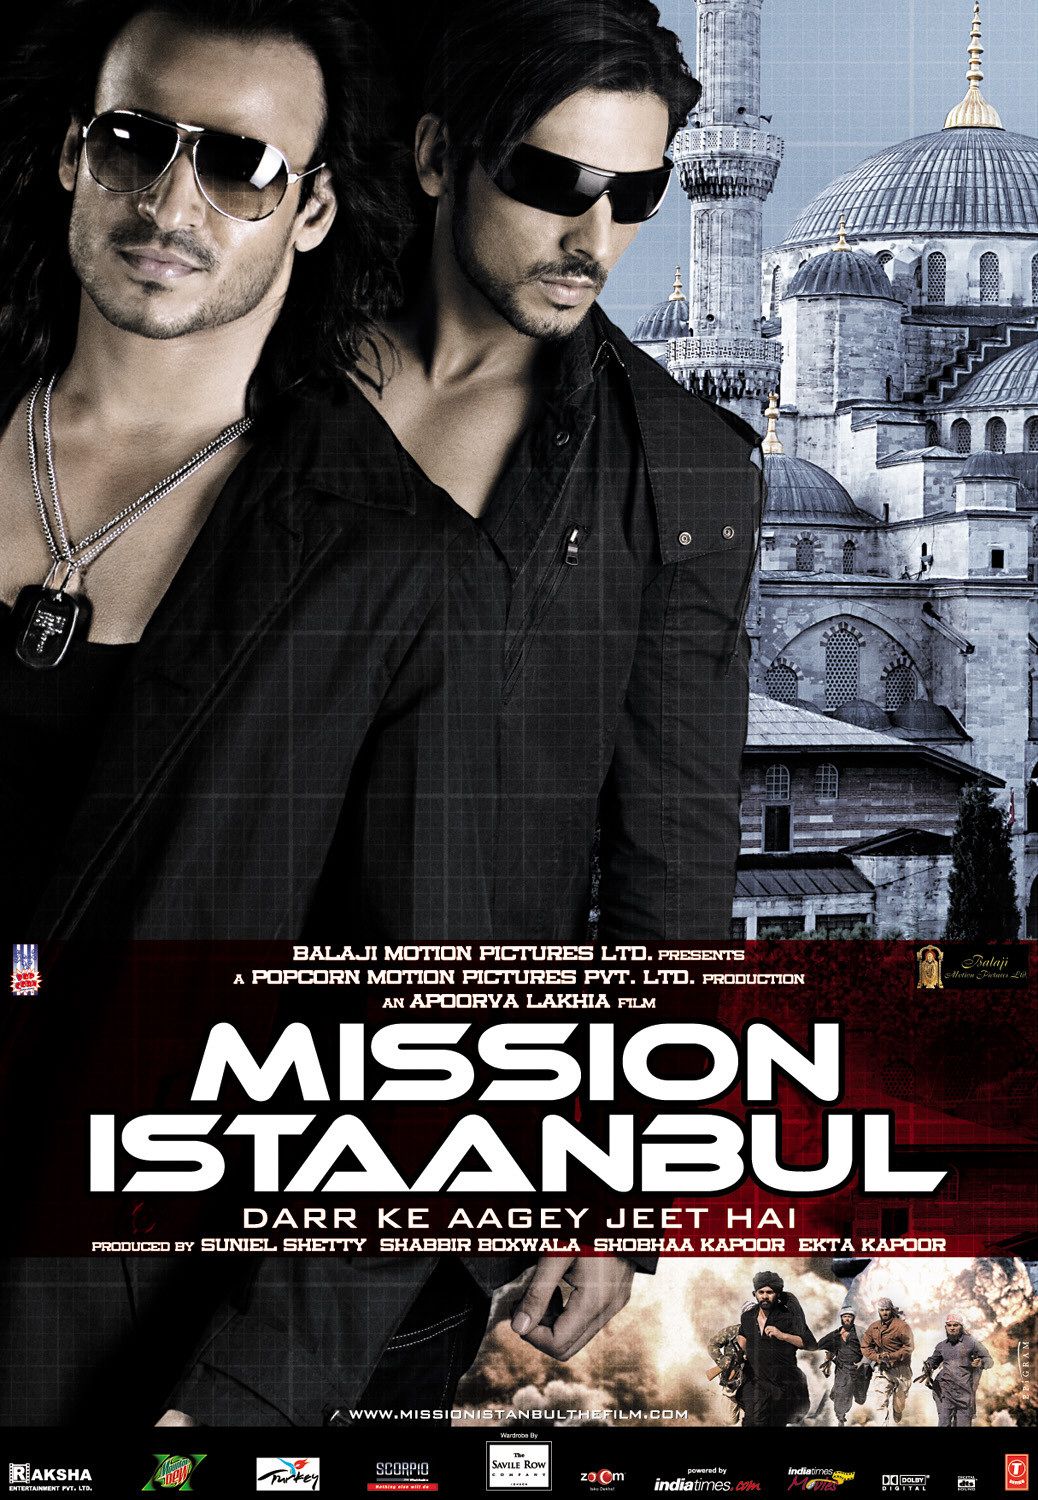 Extra Large Movie Poster Image for Mission Istaanbul (#4 of 7)